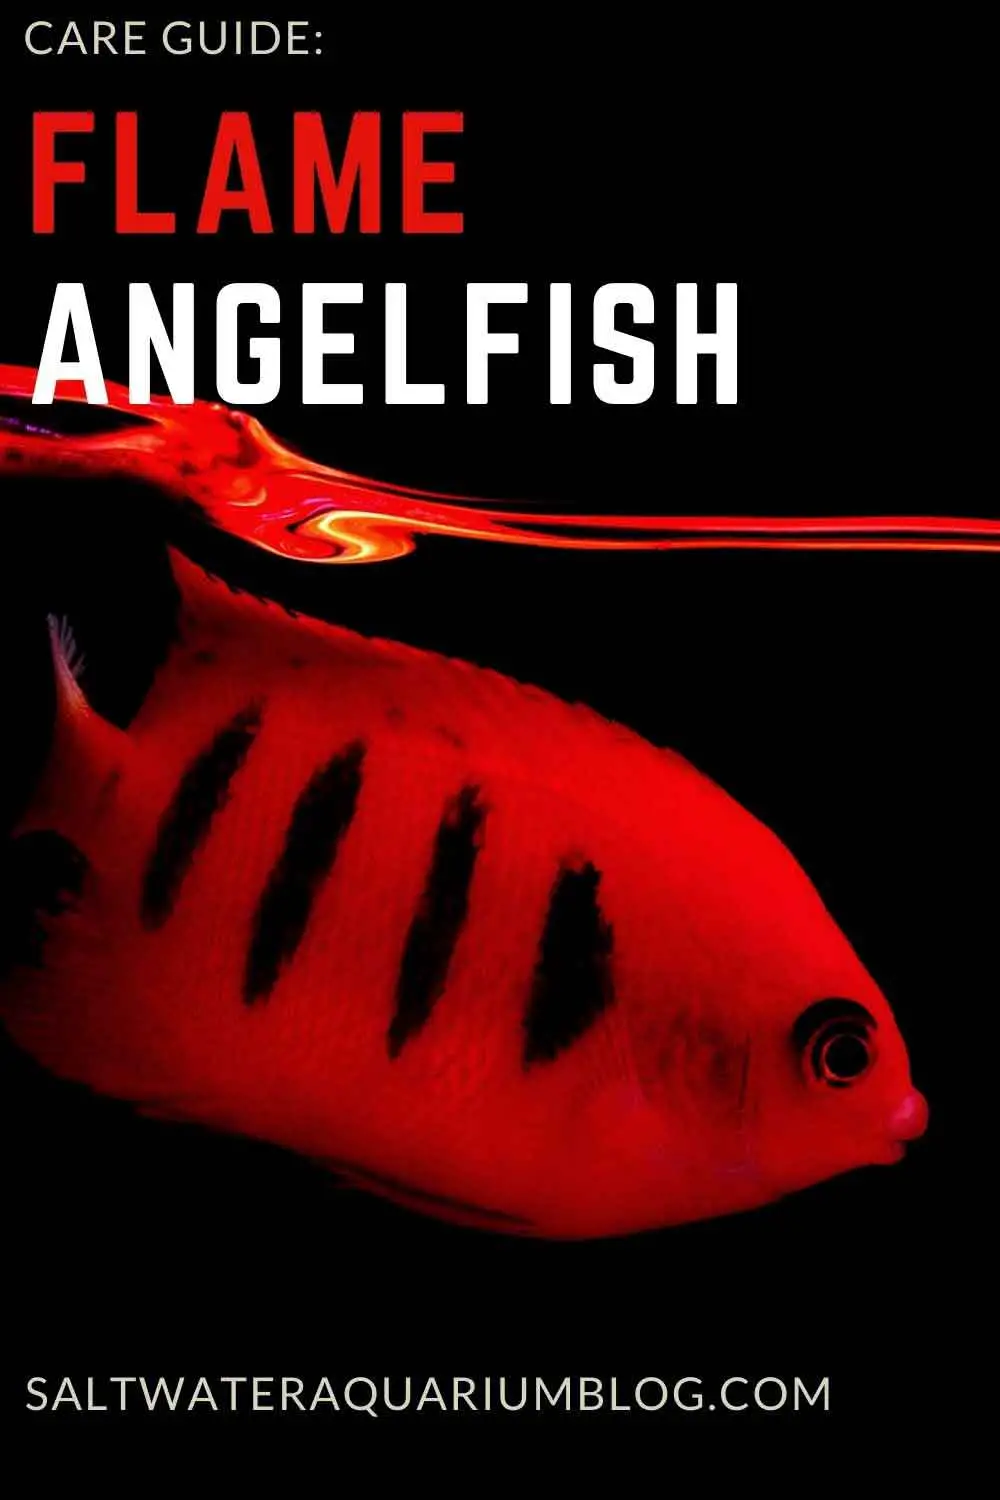 Flame angelfish care guide